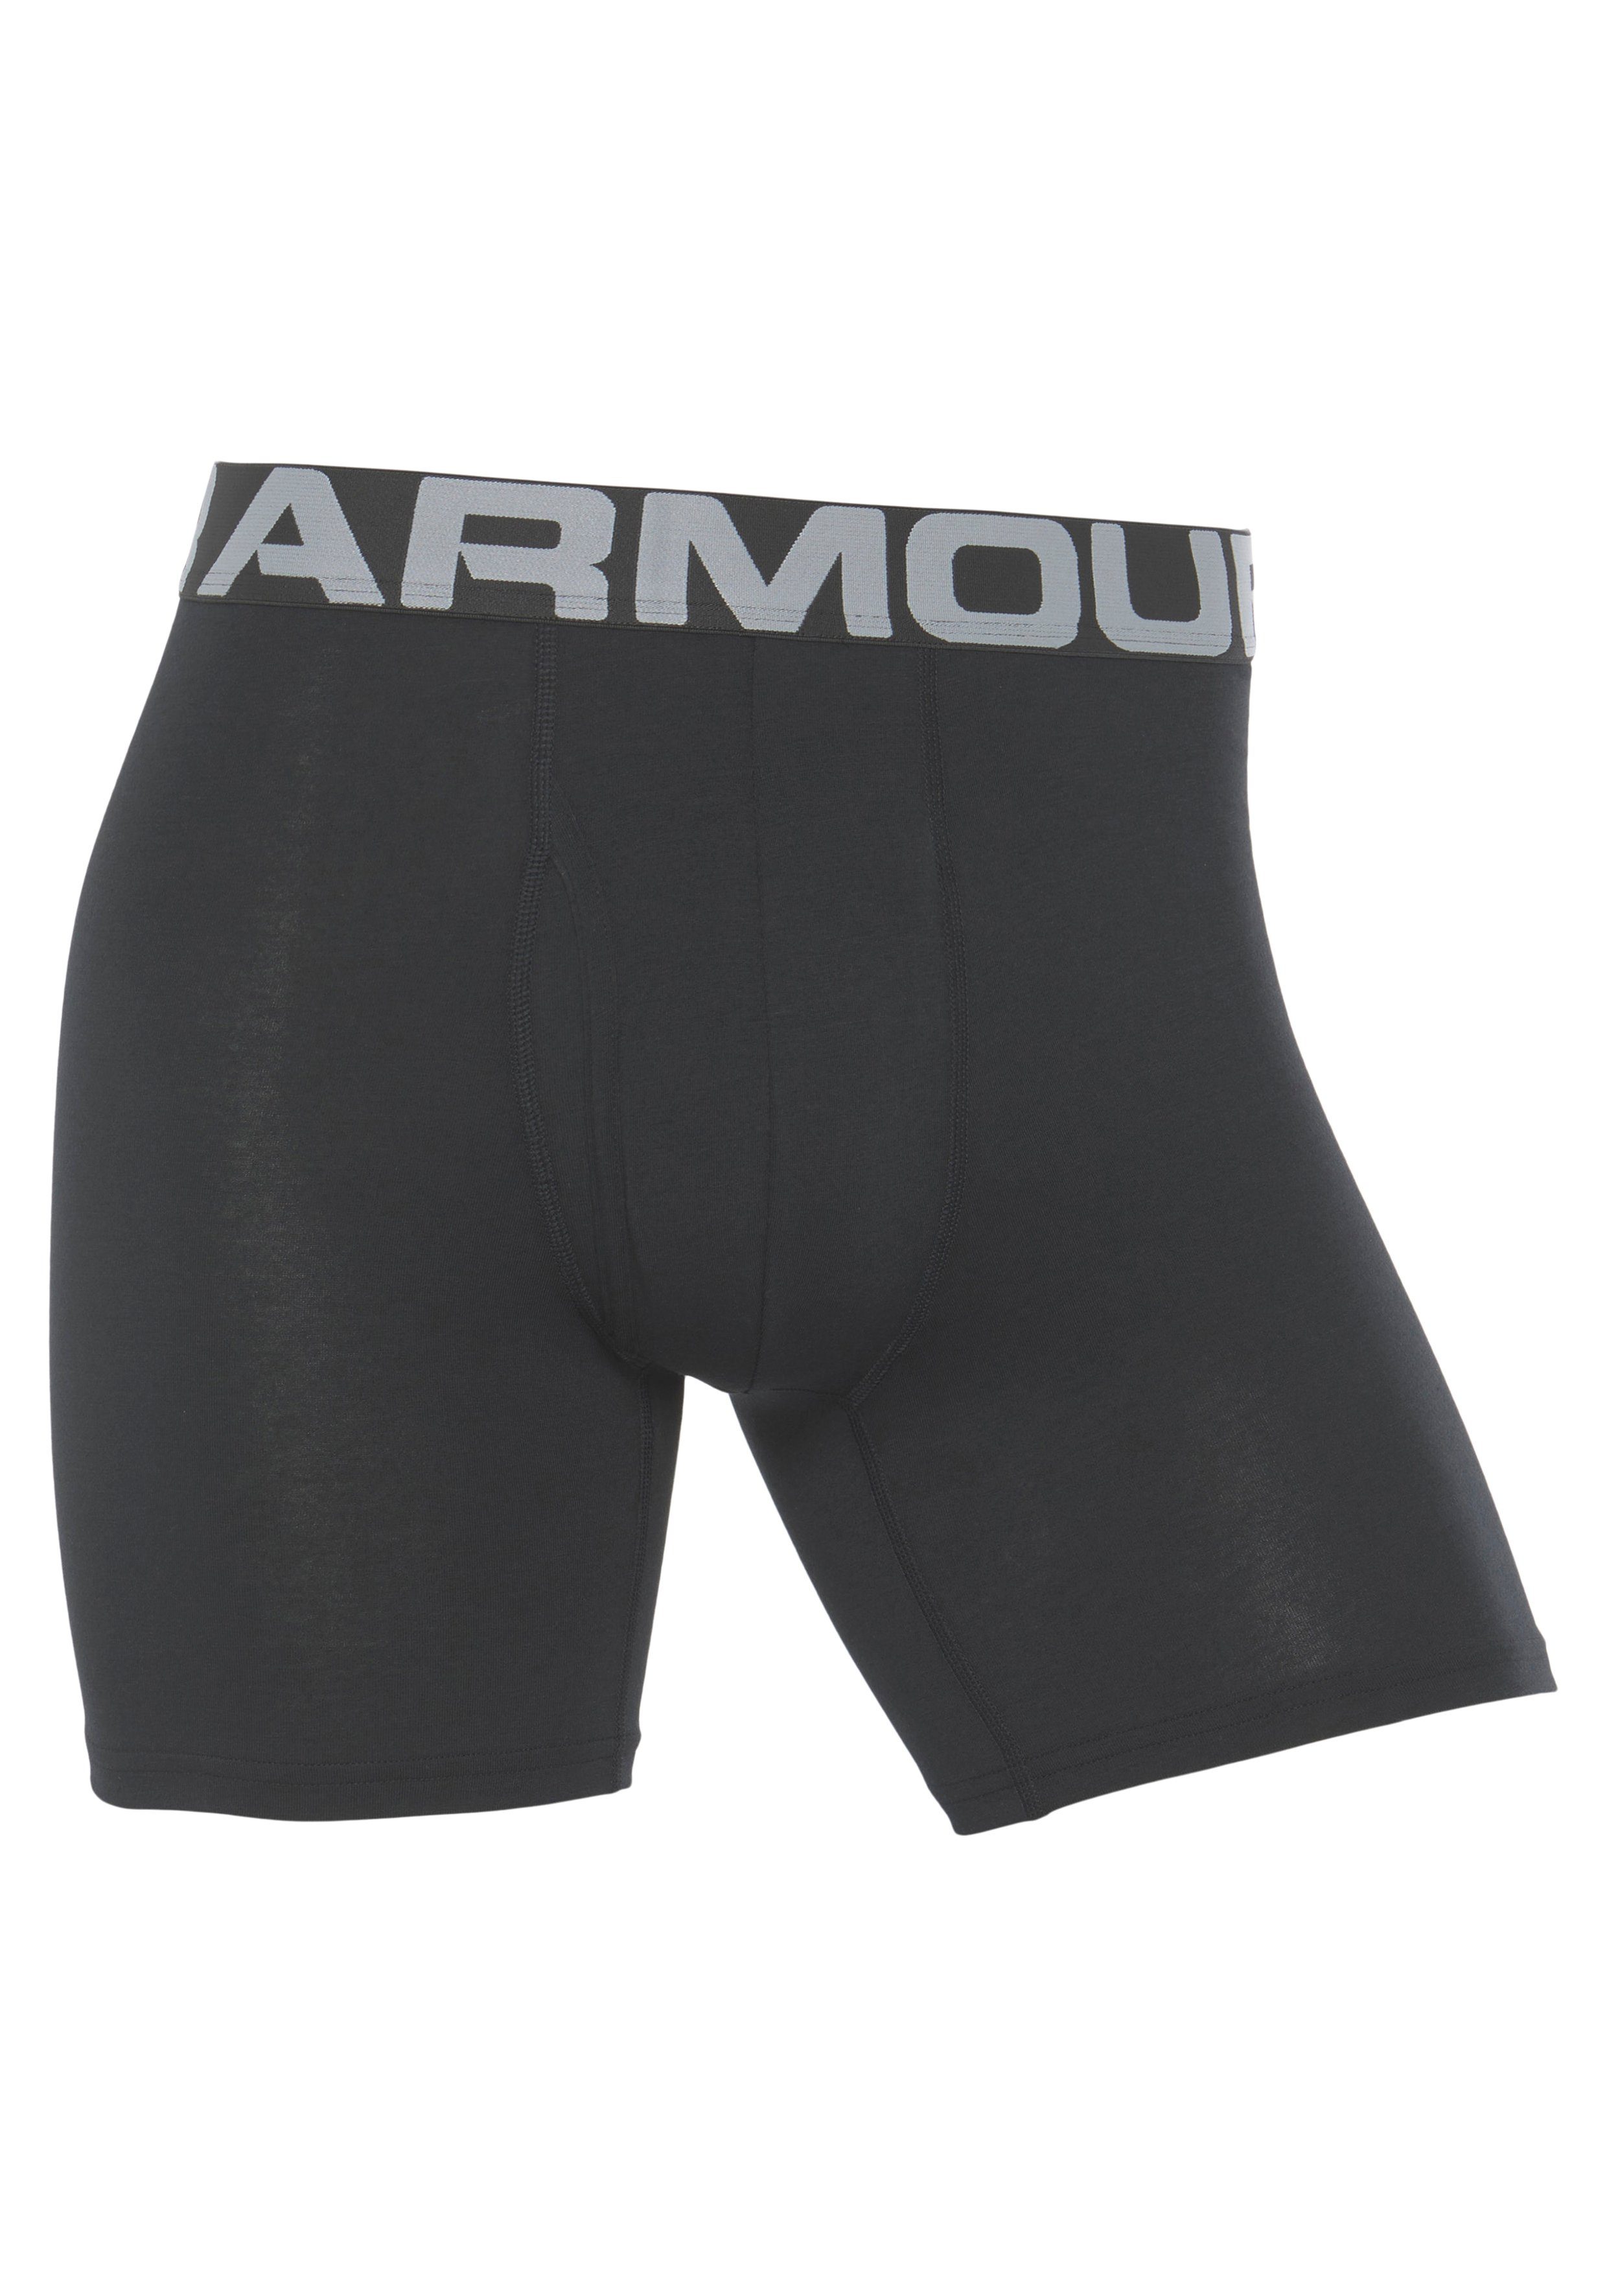 Under Armour® CHARGED schwarz COTTON 3-St., Boxershorts 6 PACK (Packung, 3er-Pack) in 1